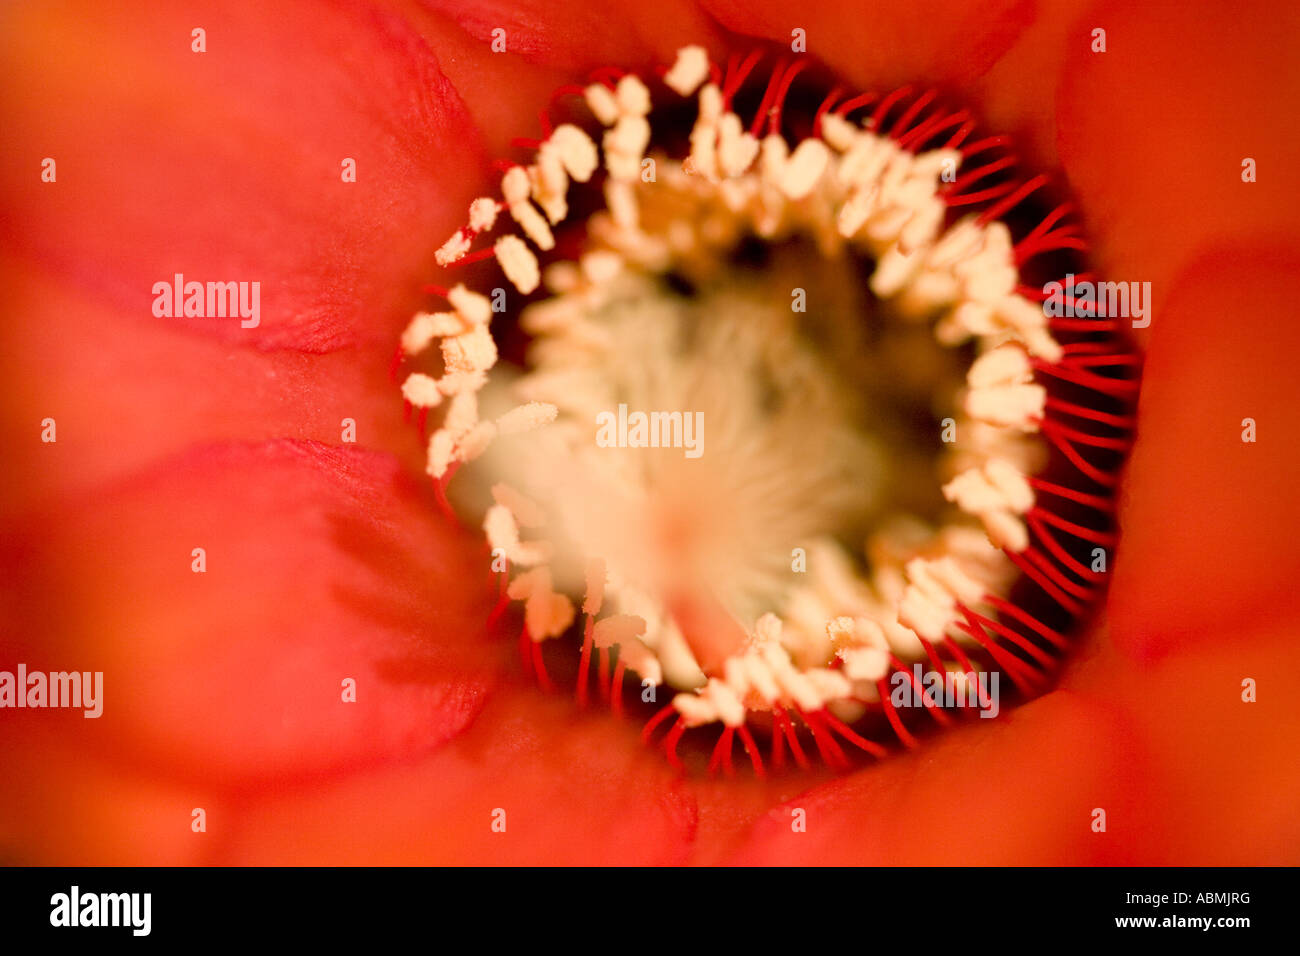 Close up of an echinopsis huascha known as a red torch cactus.  This plant has spines or sharp edges. Stock Photo